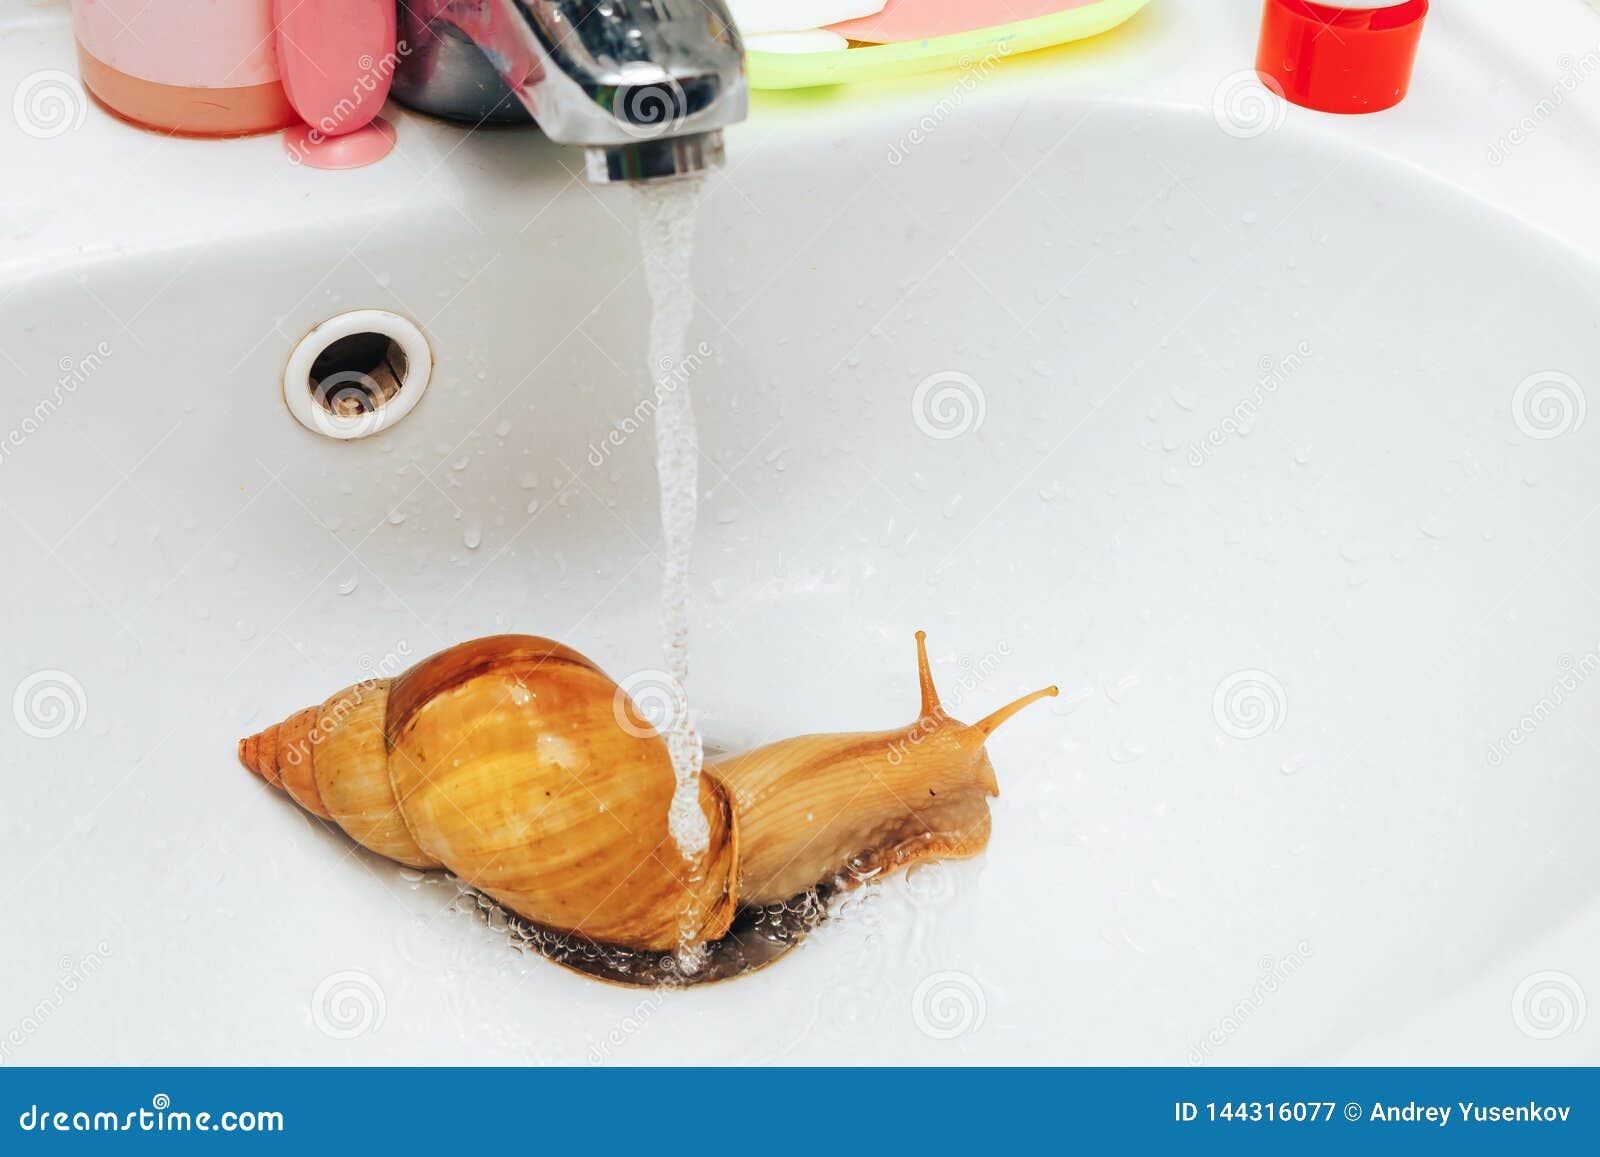 Snail Takes a Shower. Splashes and Water Drops. Stock Image - Image of  gourmet, large: 144316077